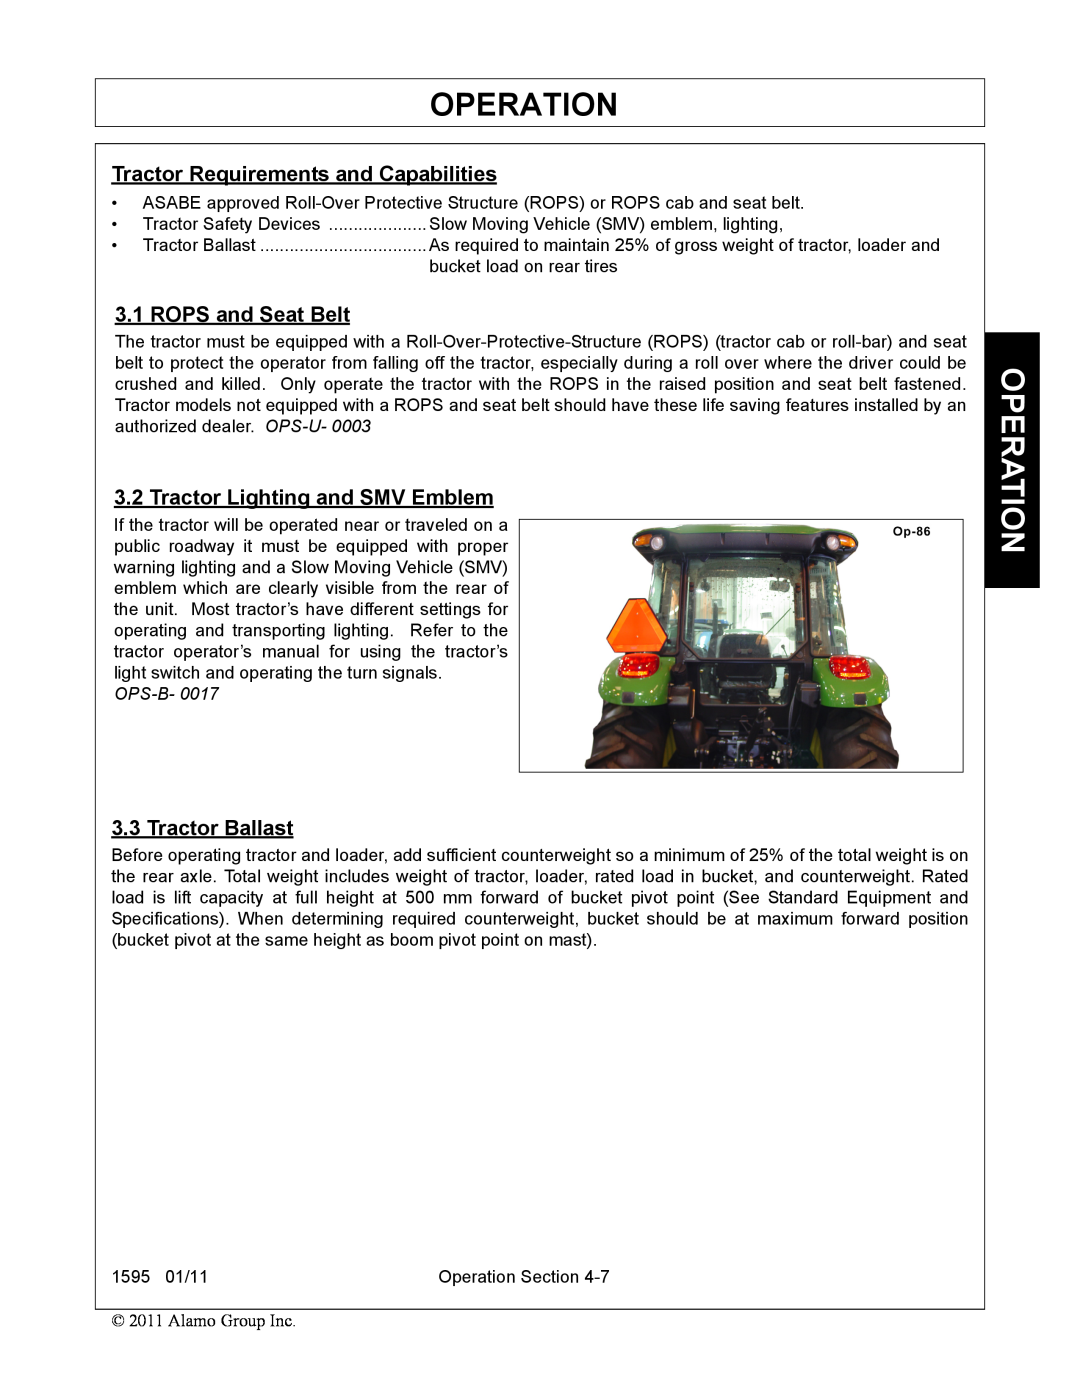 Alamo 1595 Operation, Tractor Requirements and Capabilities, ROPS and Seat Belt, Tractor Lighting and SMV Emblem, Ops-B 